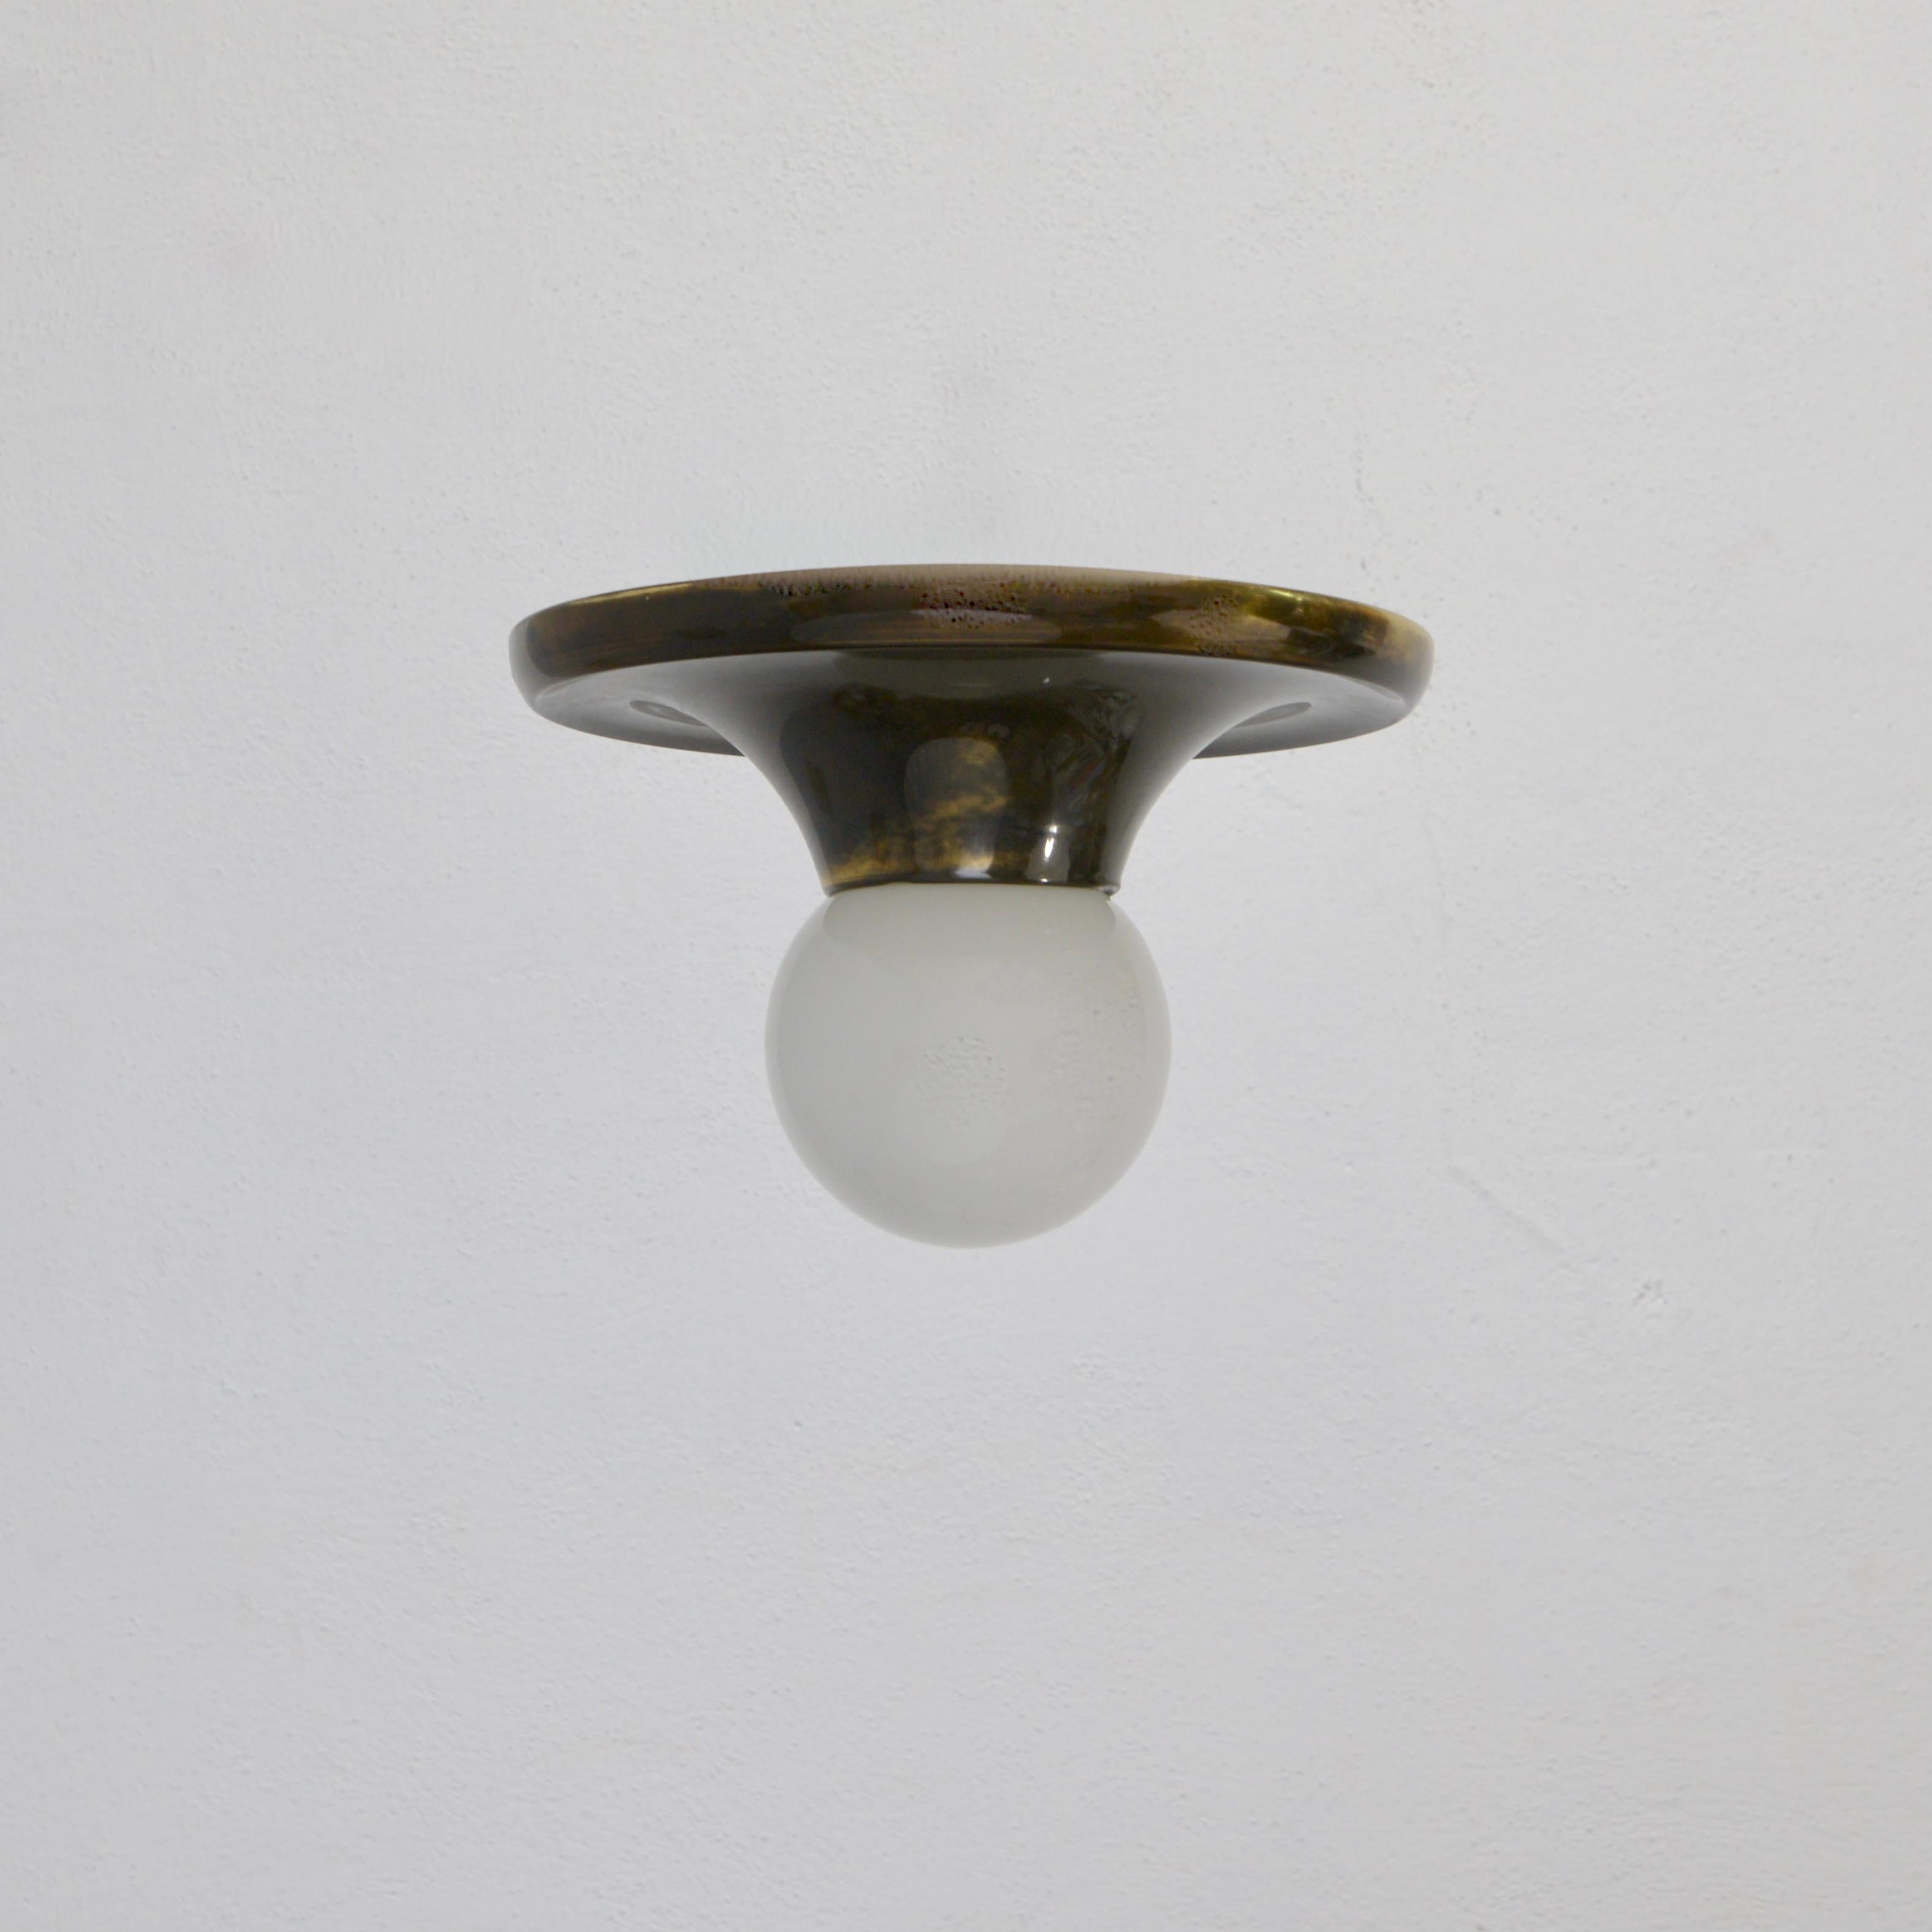 Light Ball Lamp by: Achille & Pier Giacomo Castiglioni

Classic 1950s Italian flush or wall mount light fixture in darkened brass and blown glass. Wired with a single E26 medium based socket for use in the USA.
Measurements:
12.75